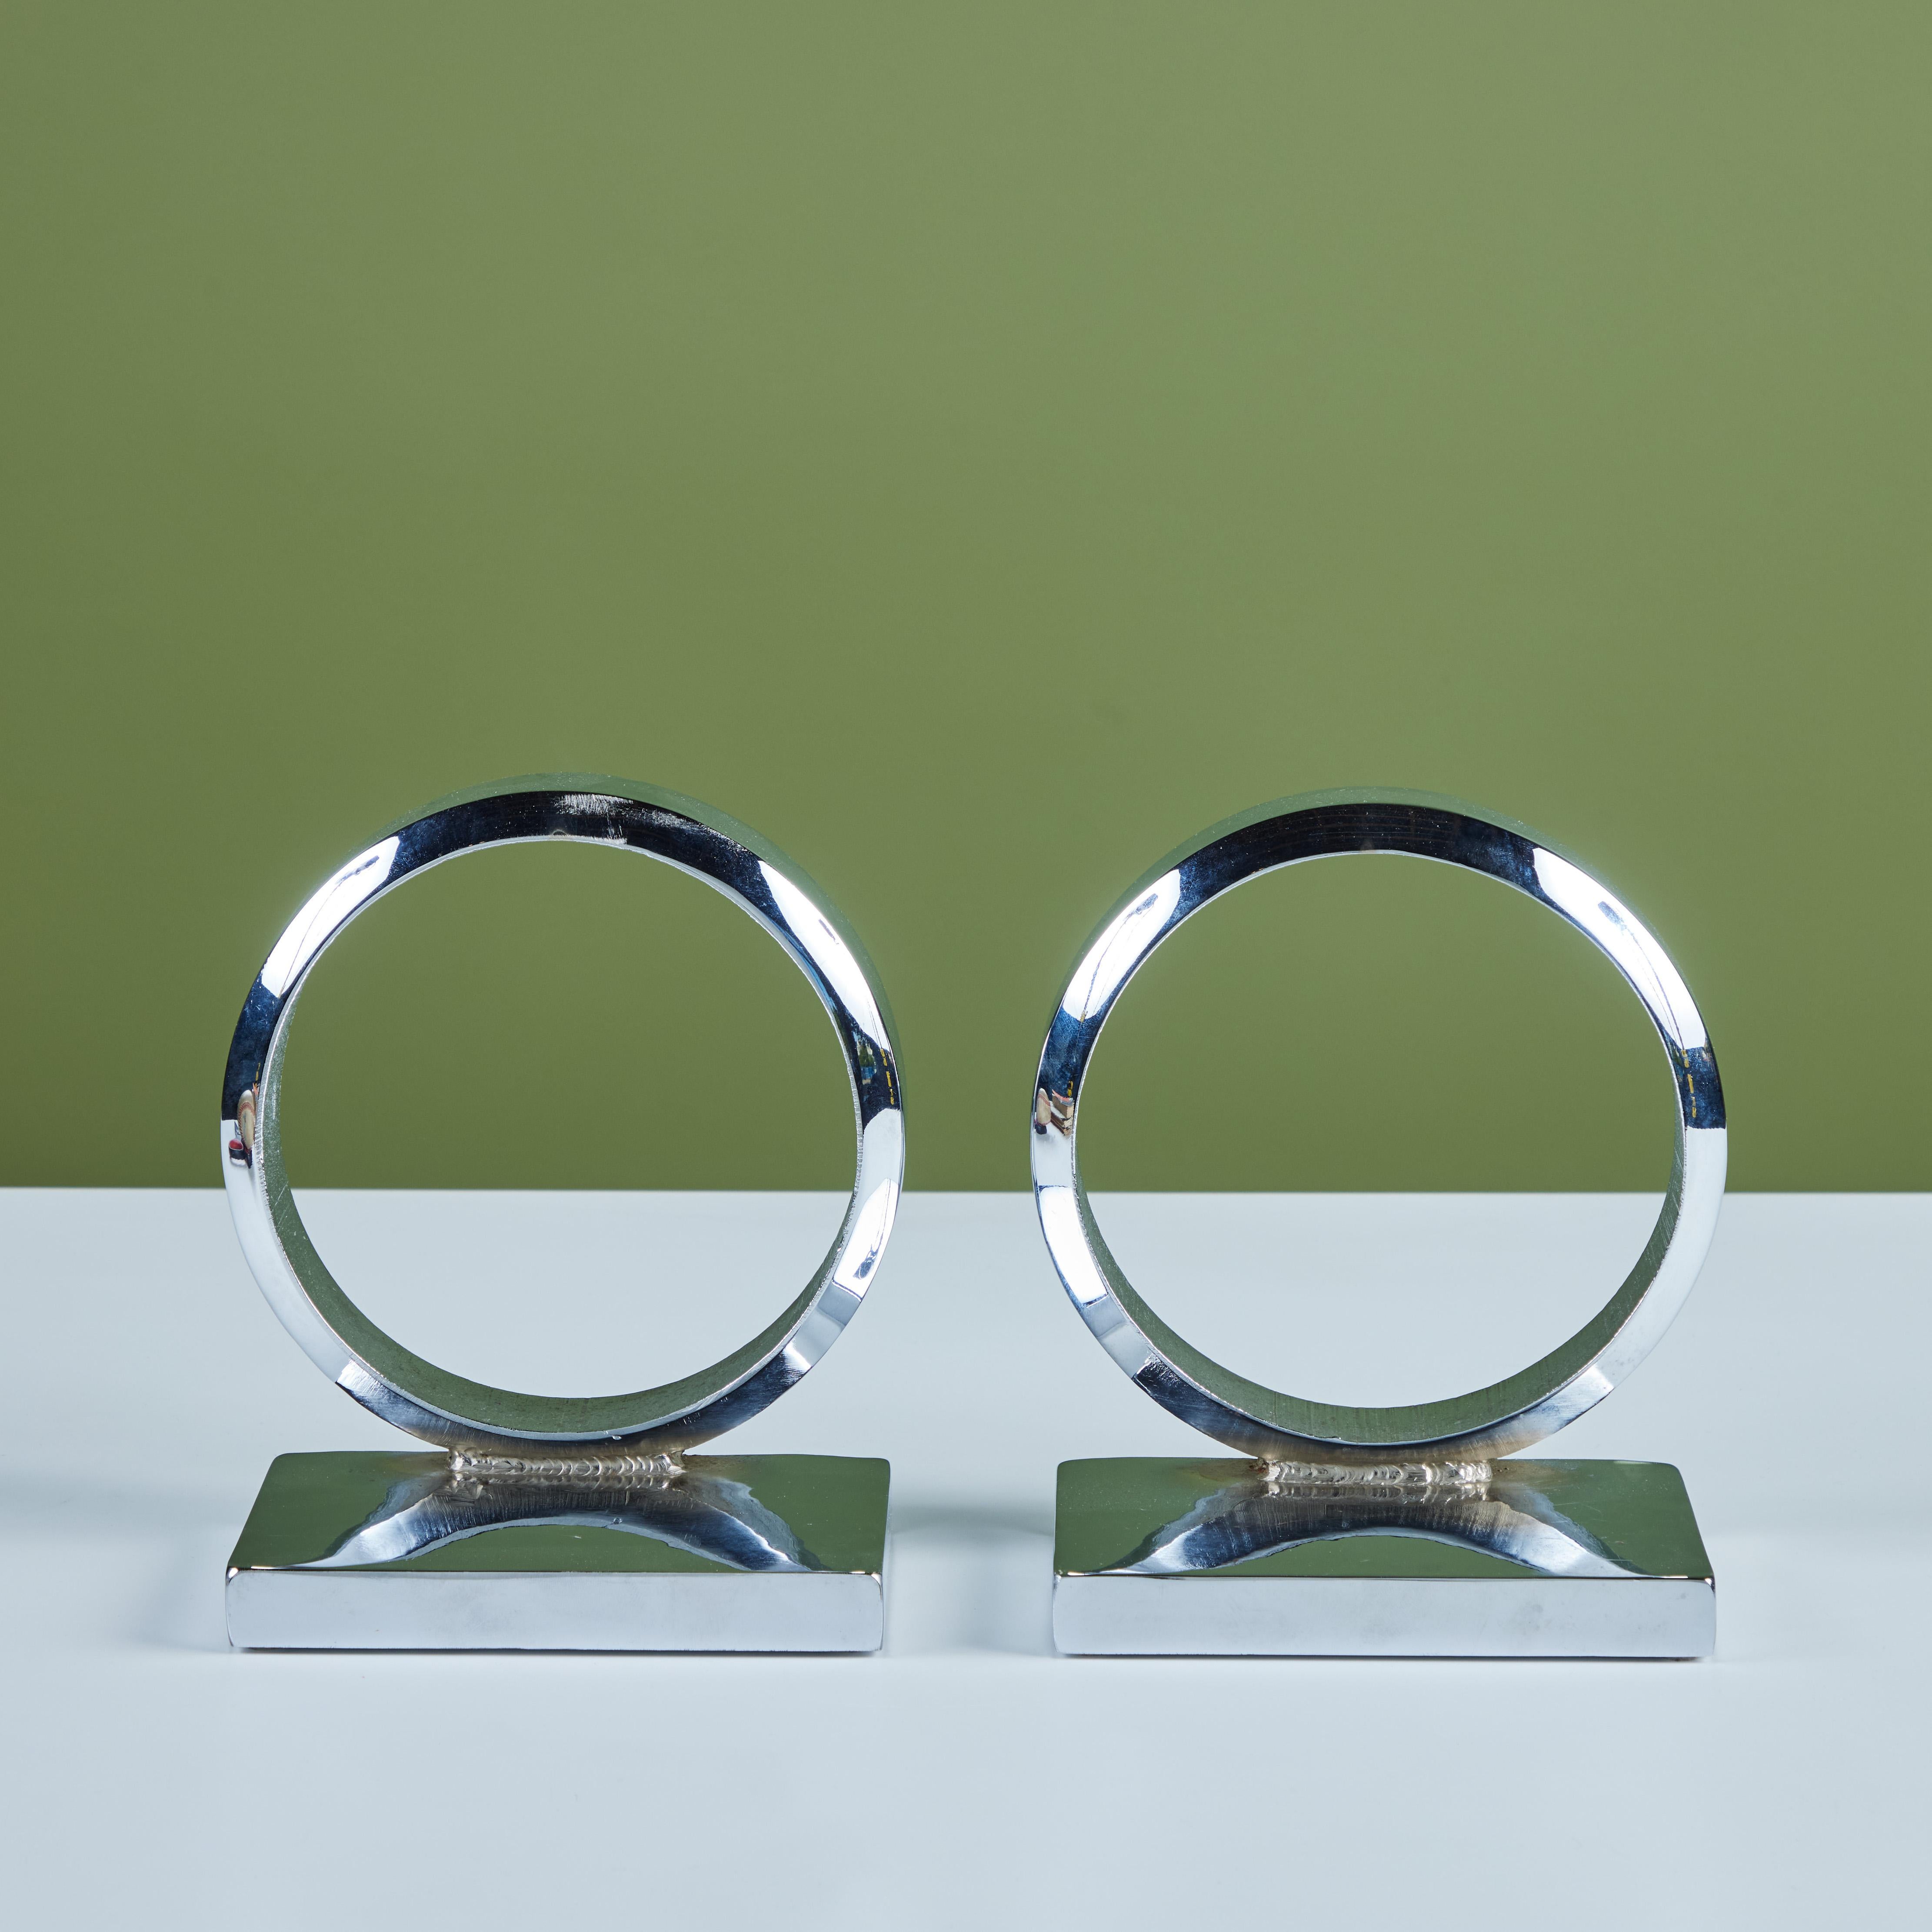 Circular Chrome Bookends in the Style of Curtis Jeré For Sale 2